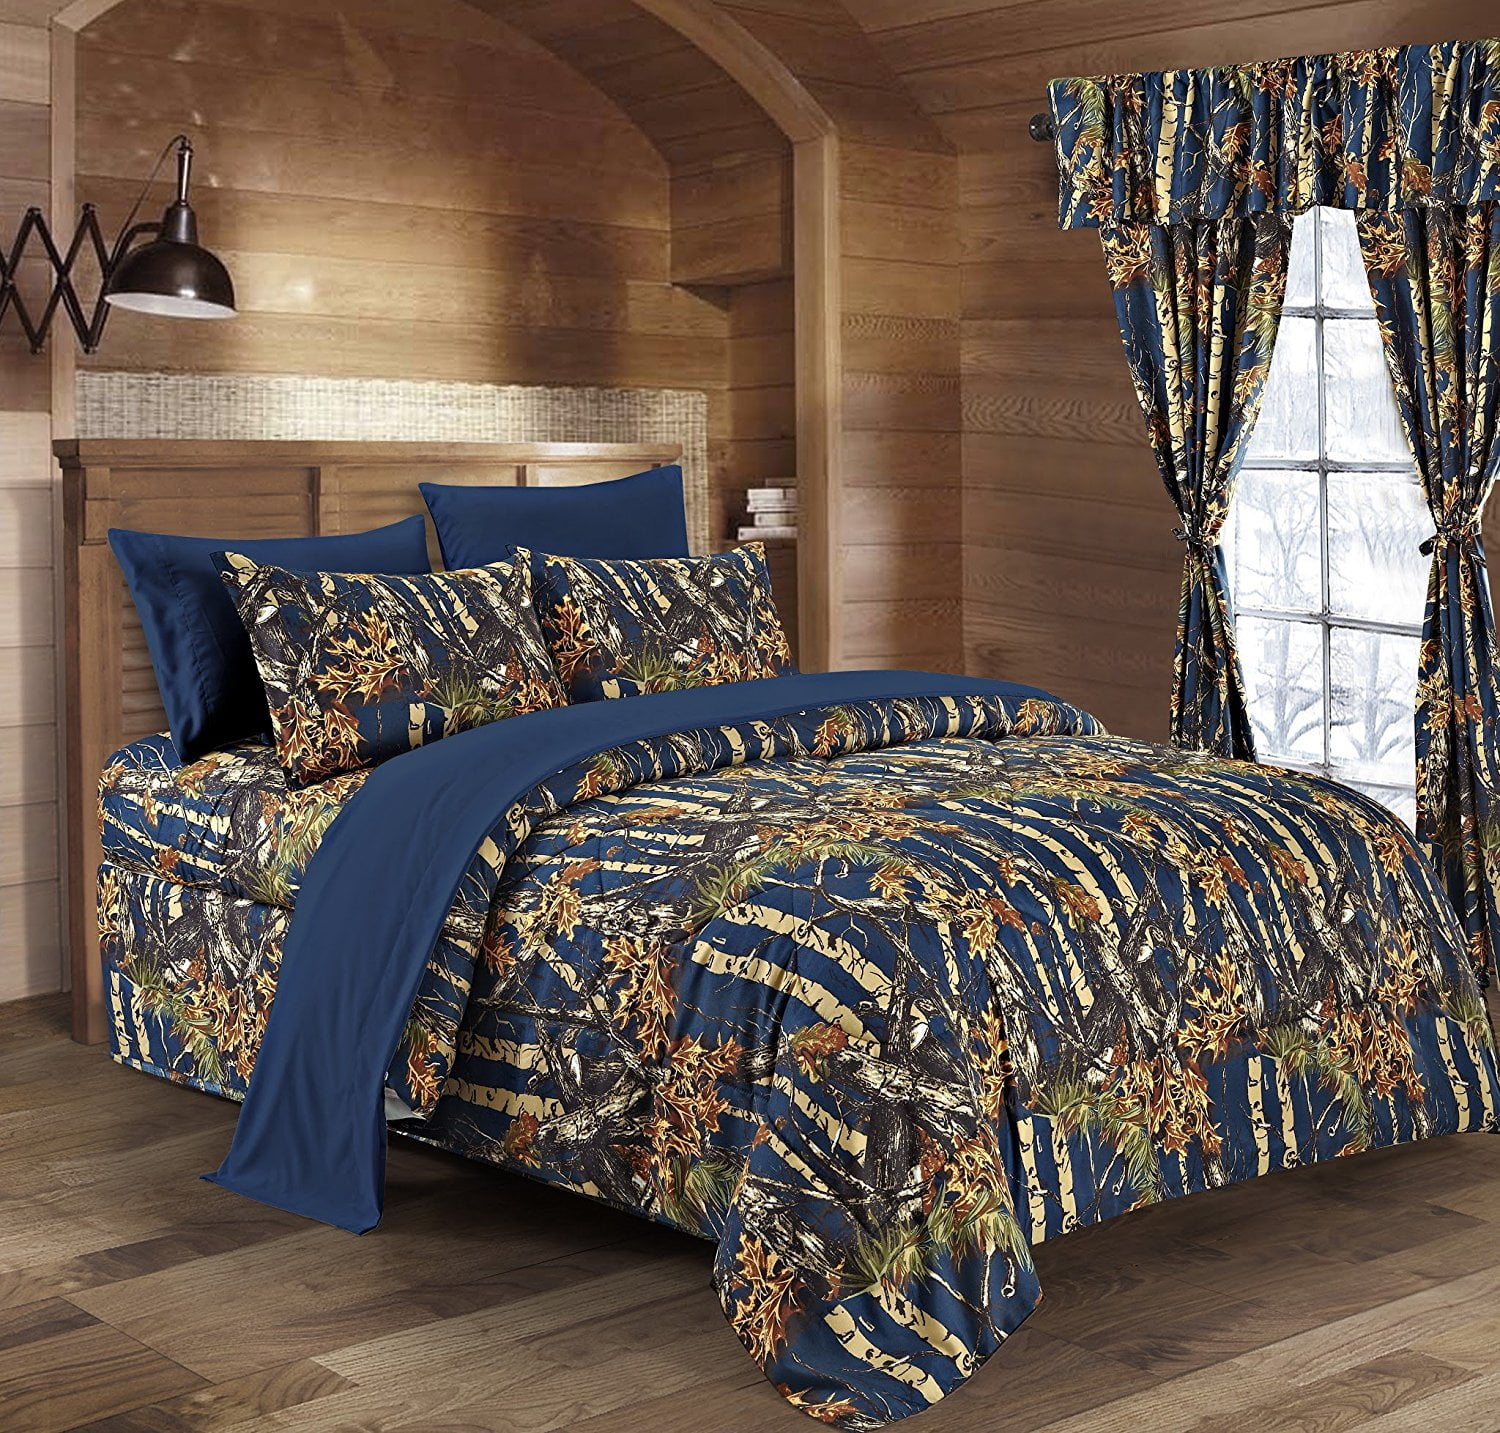 The Woods Navy Blue Camouflage Twin 5pc, Twin Size Orange Camo Bedding